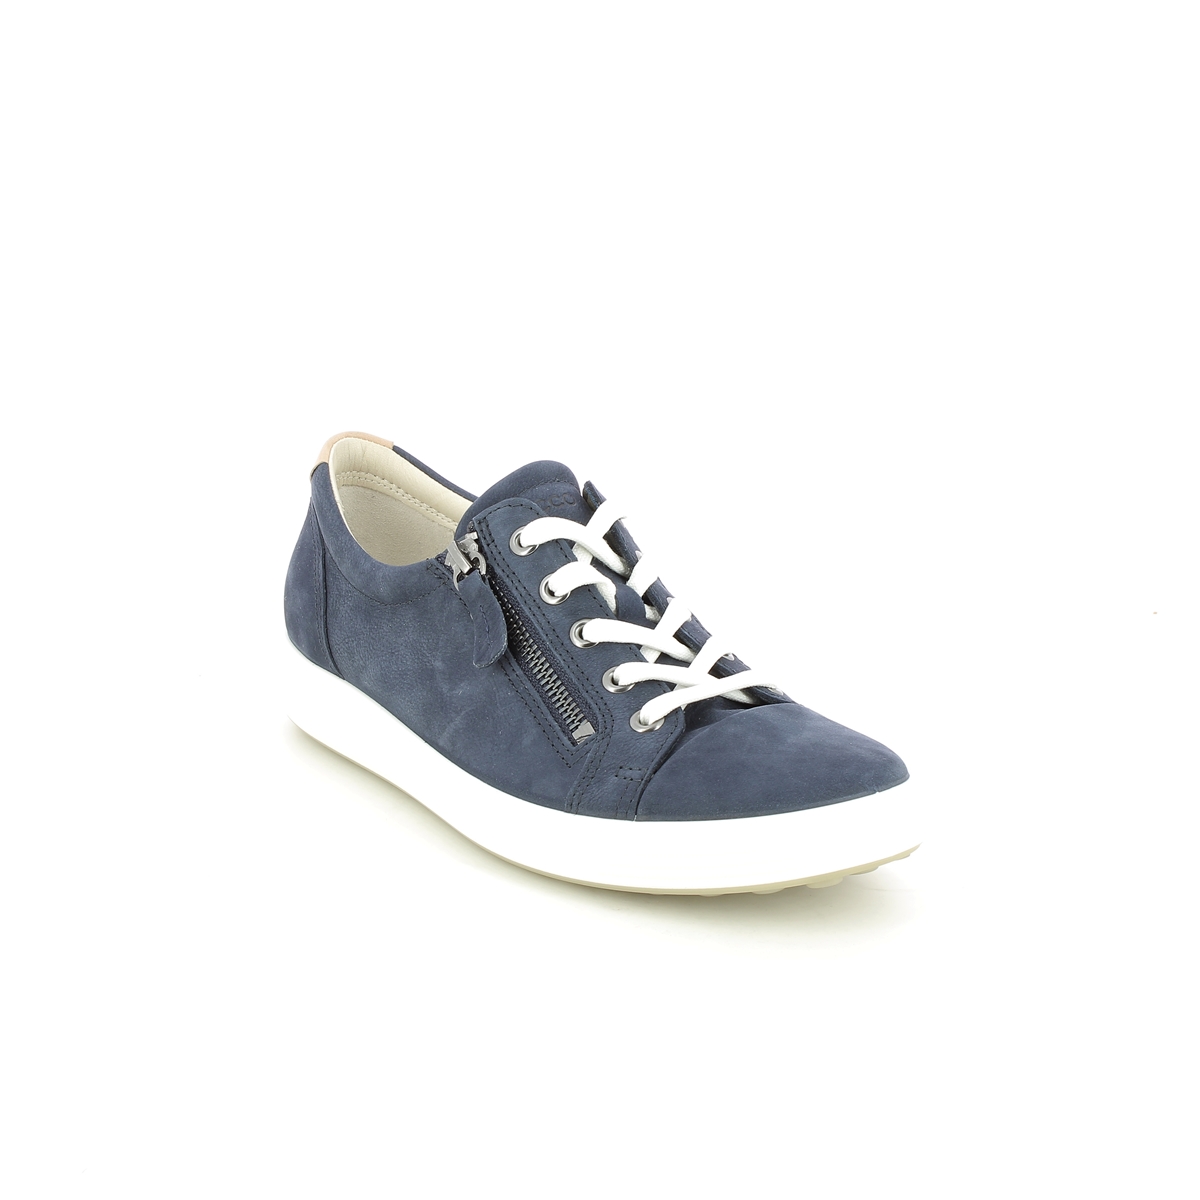 ECCO Soft 7 Lace Zip Navy Nubuck Womens trainers 430853-02303 in a Plain Nubuck Leather in Size 37